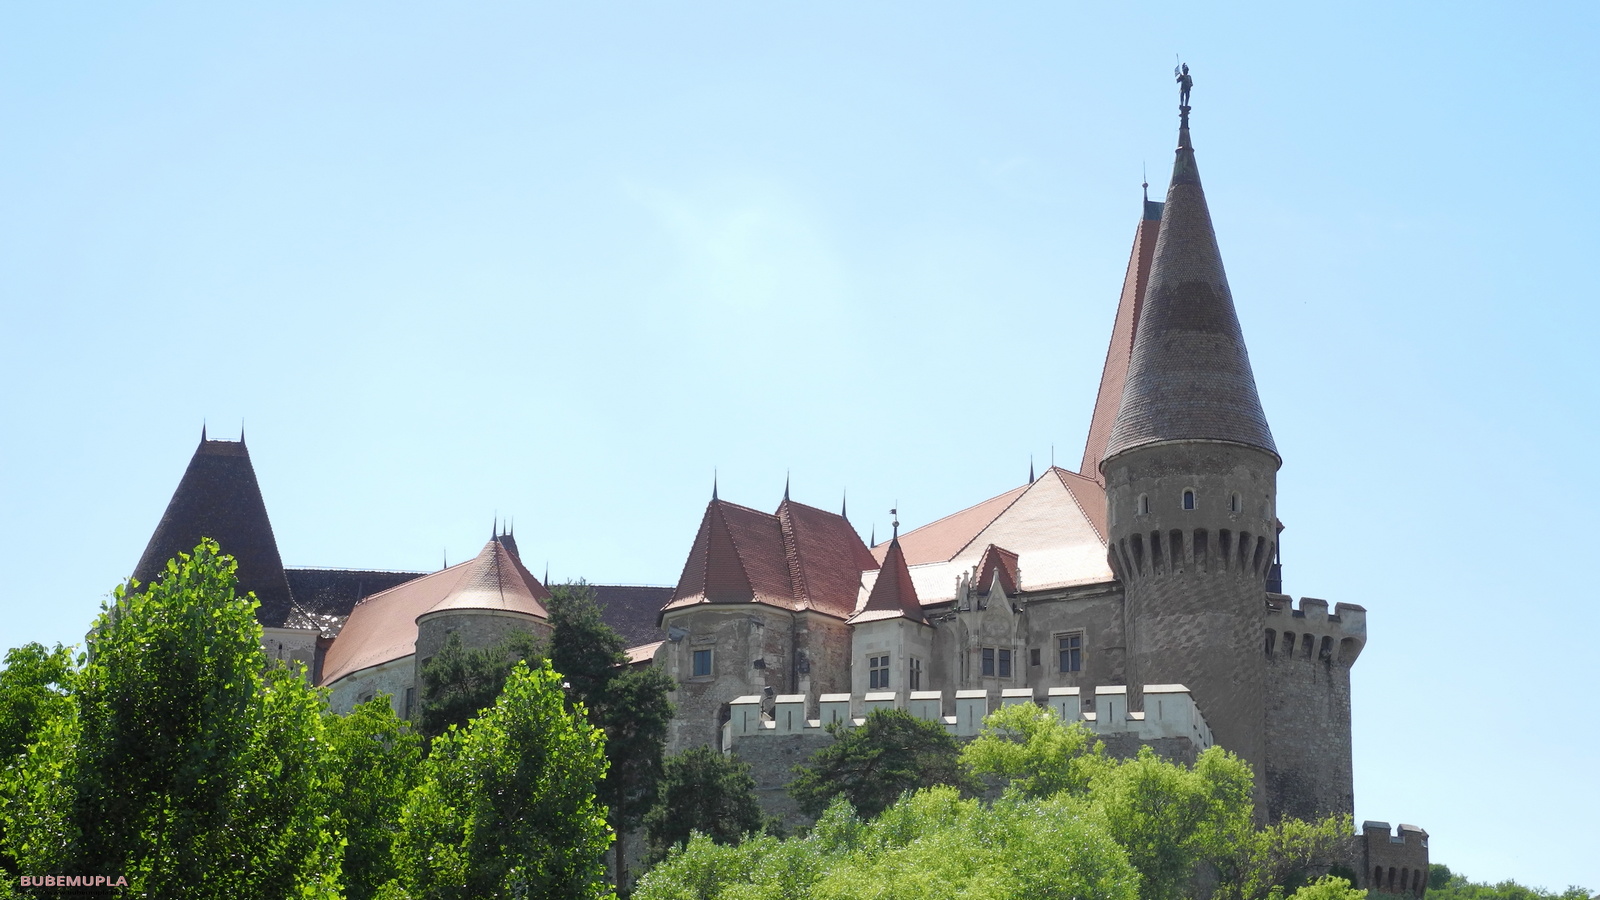 Chapter 17 in which we visit Corvin Castle